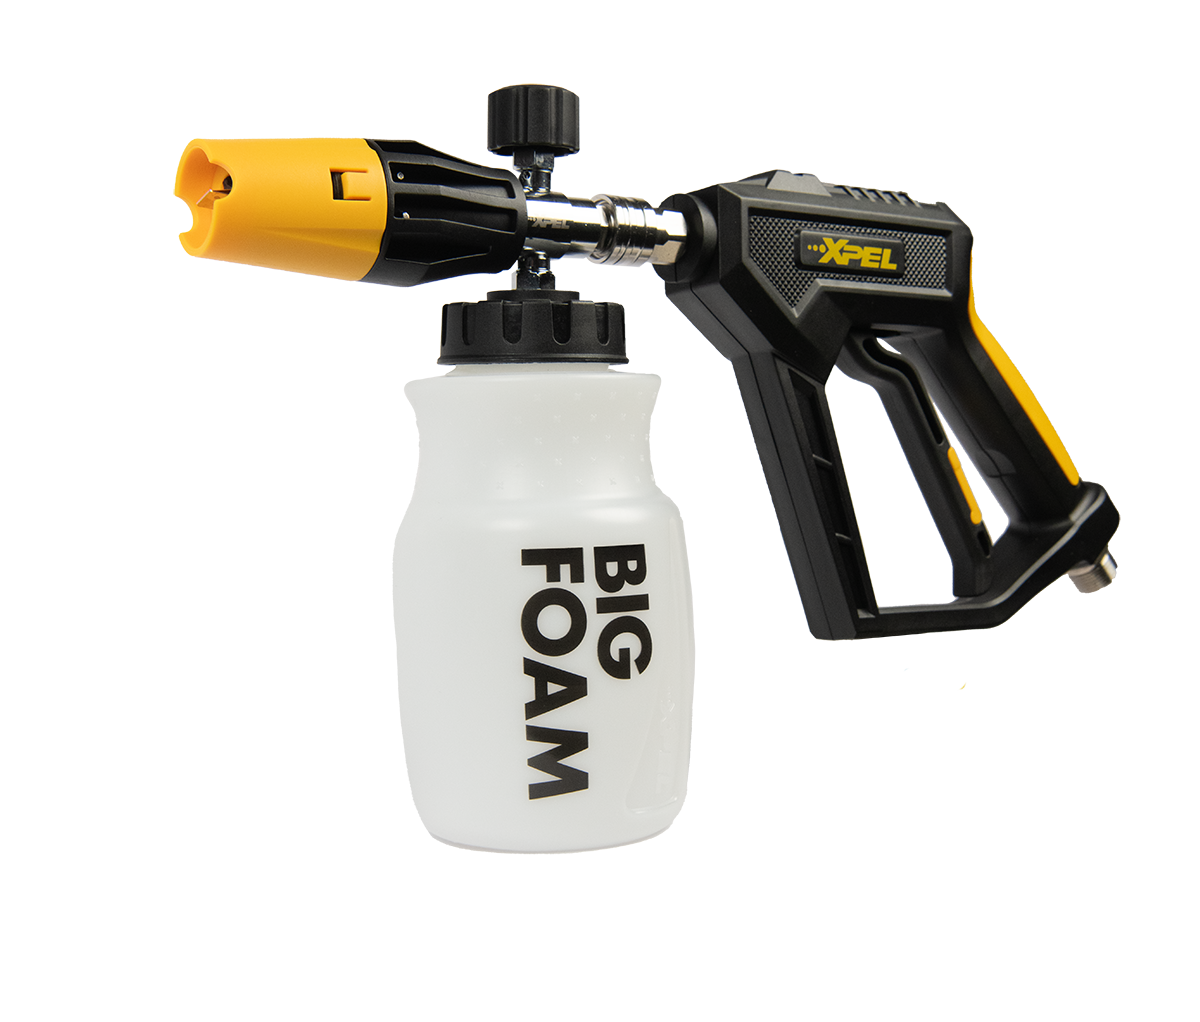 XPEL Compact Sprayer with Big Foam Cannon Attached